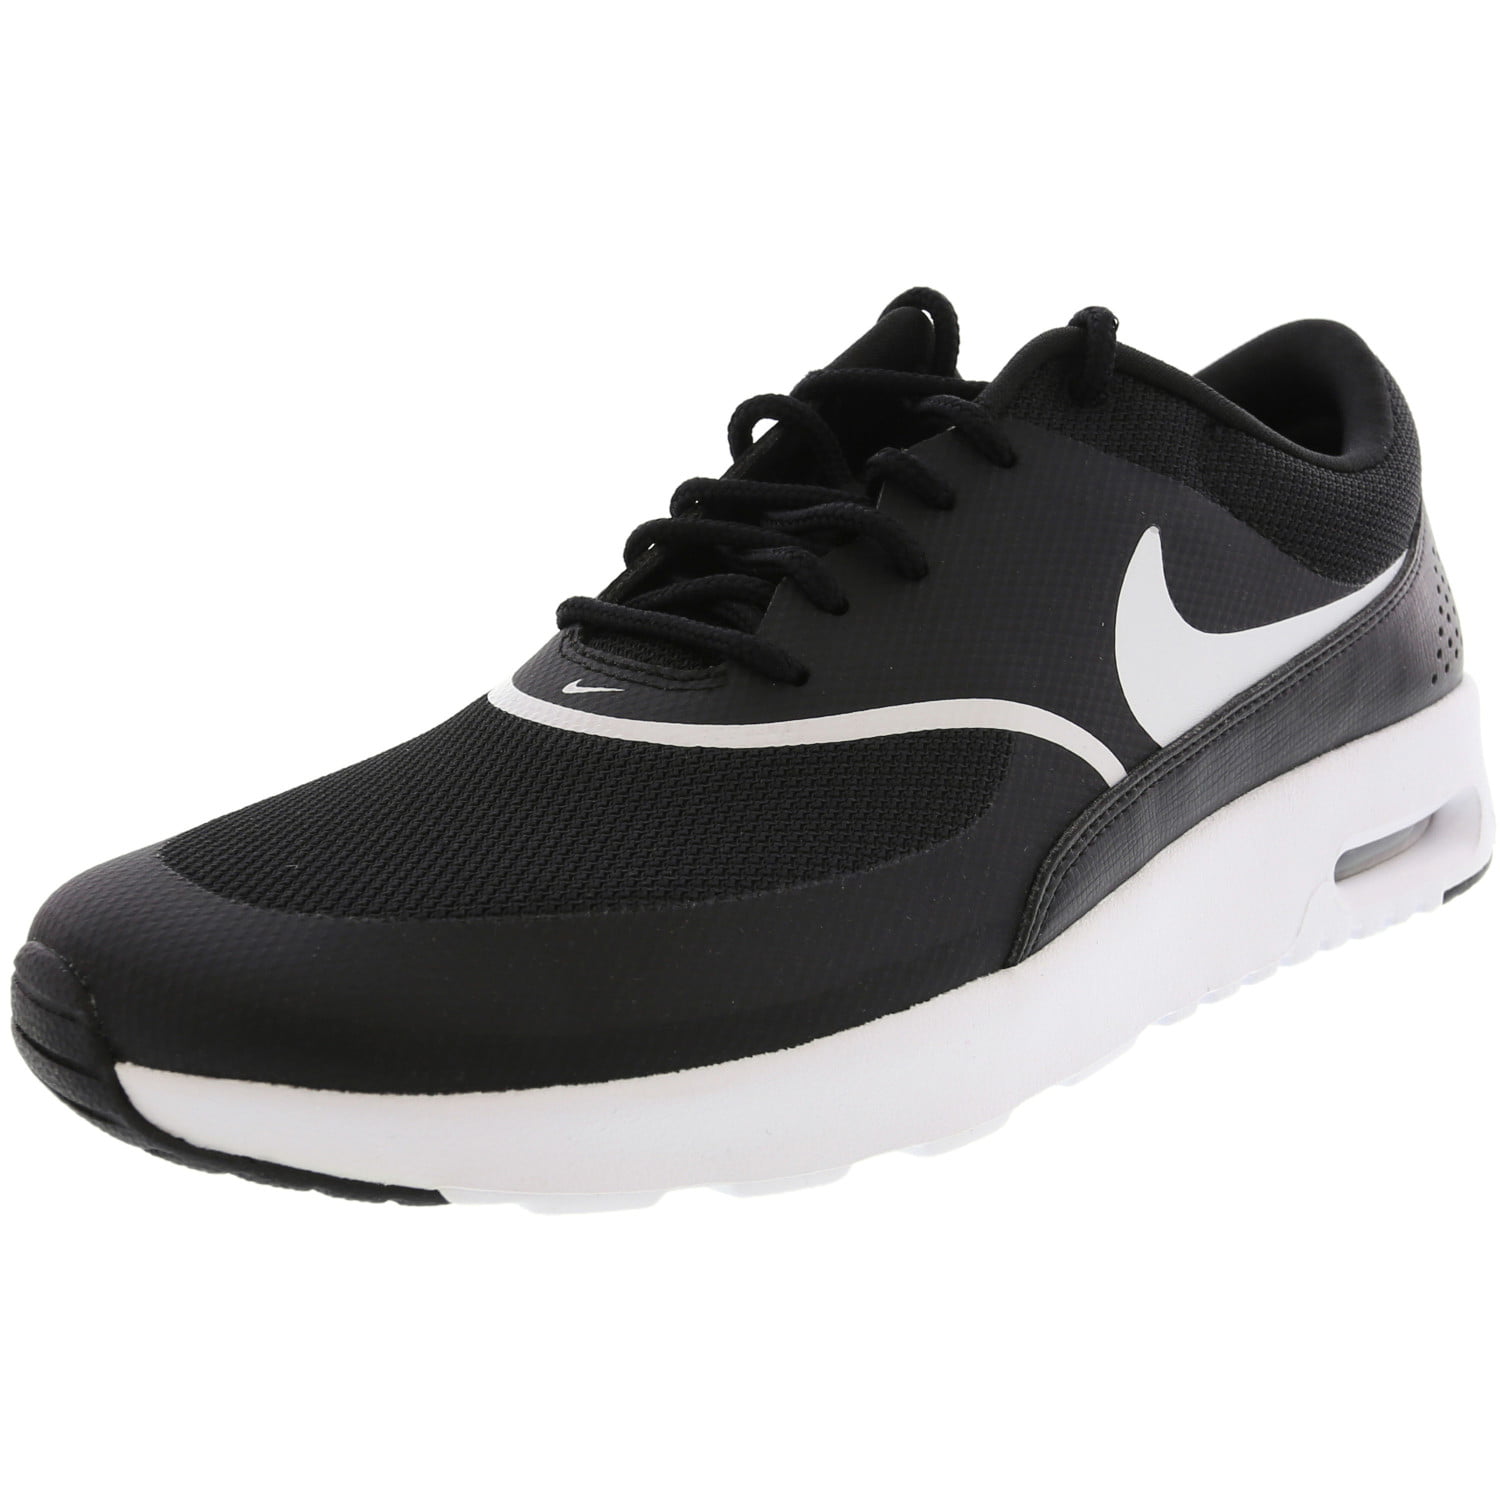 air max thea good for running